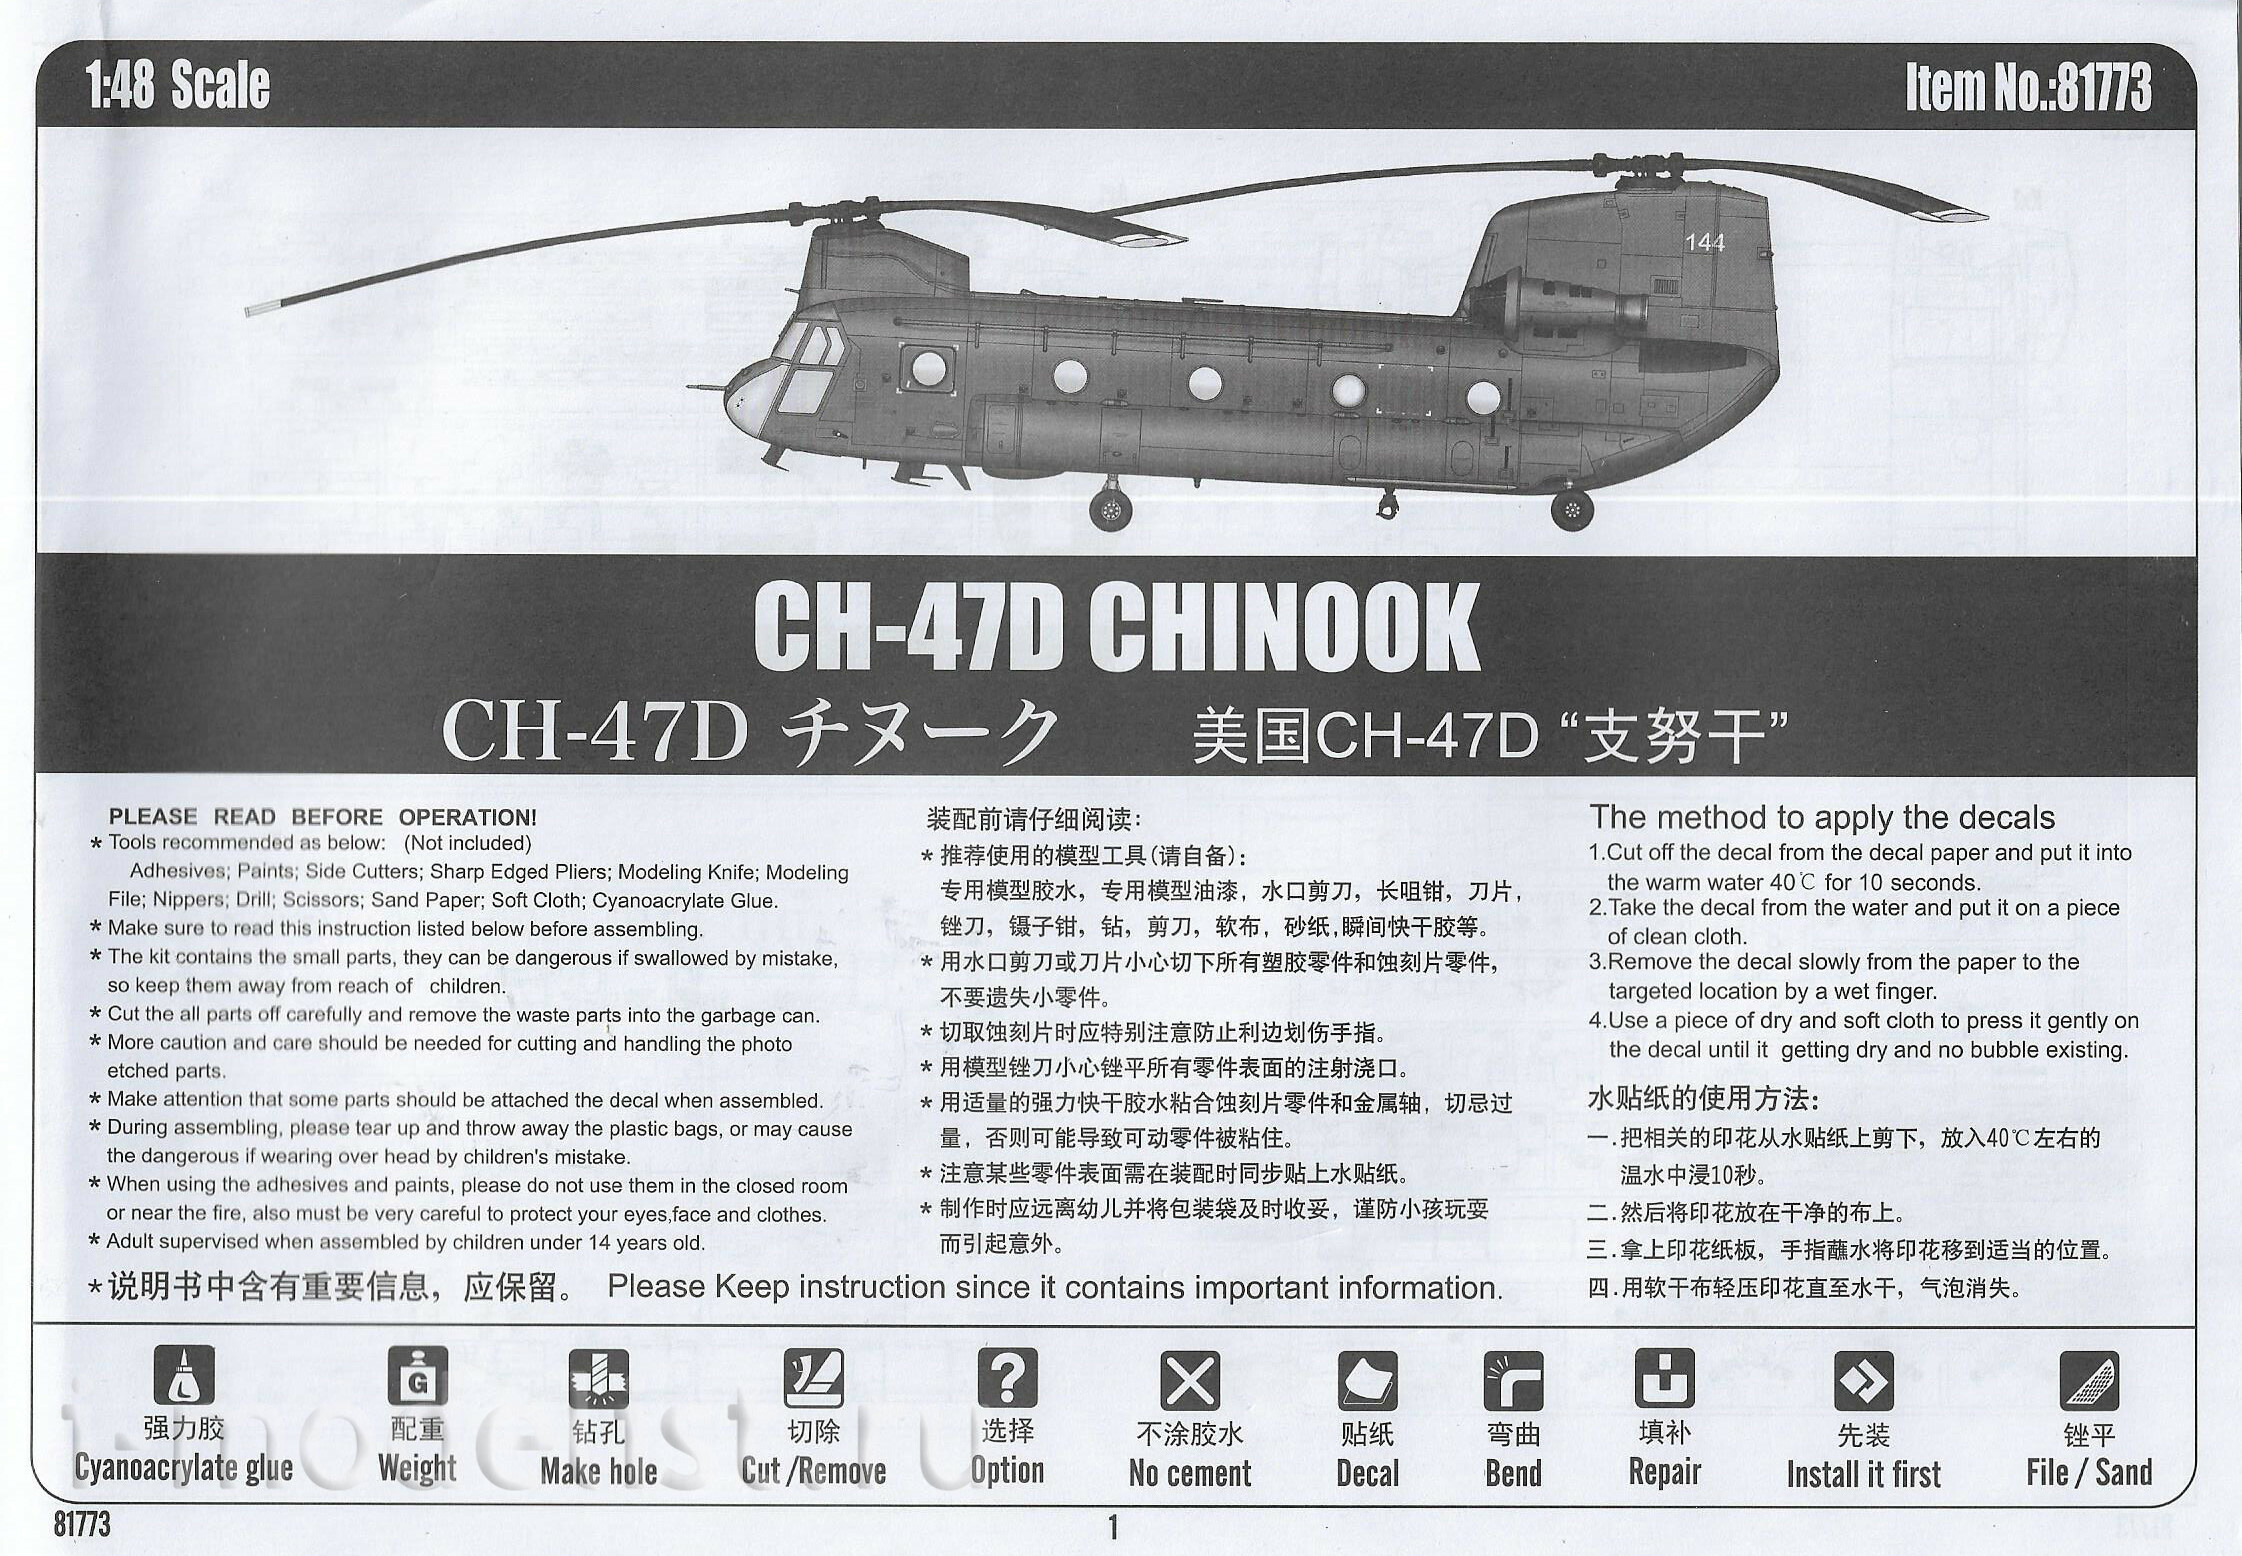 EXECUTIVE SERIES HELICOPTER MODEL CH-47D CHINOOK 1/48 BN D0248 